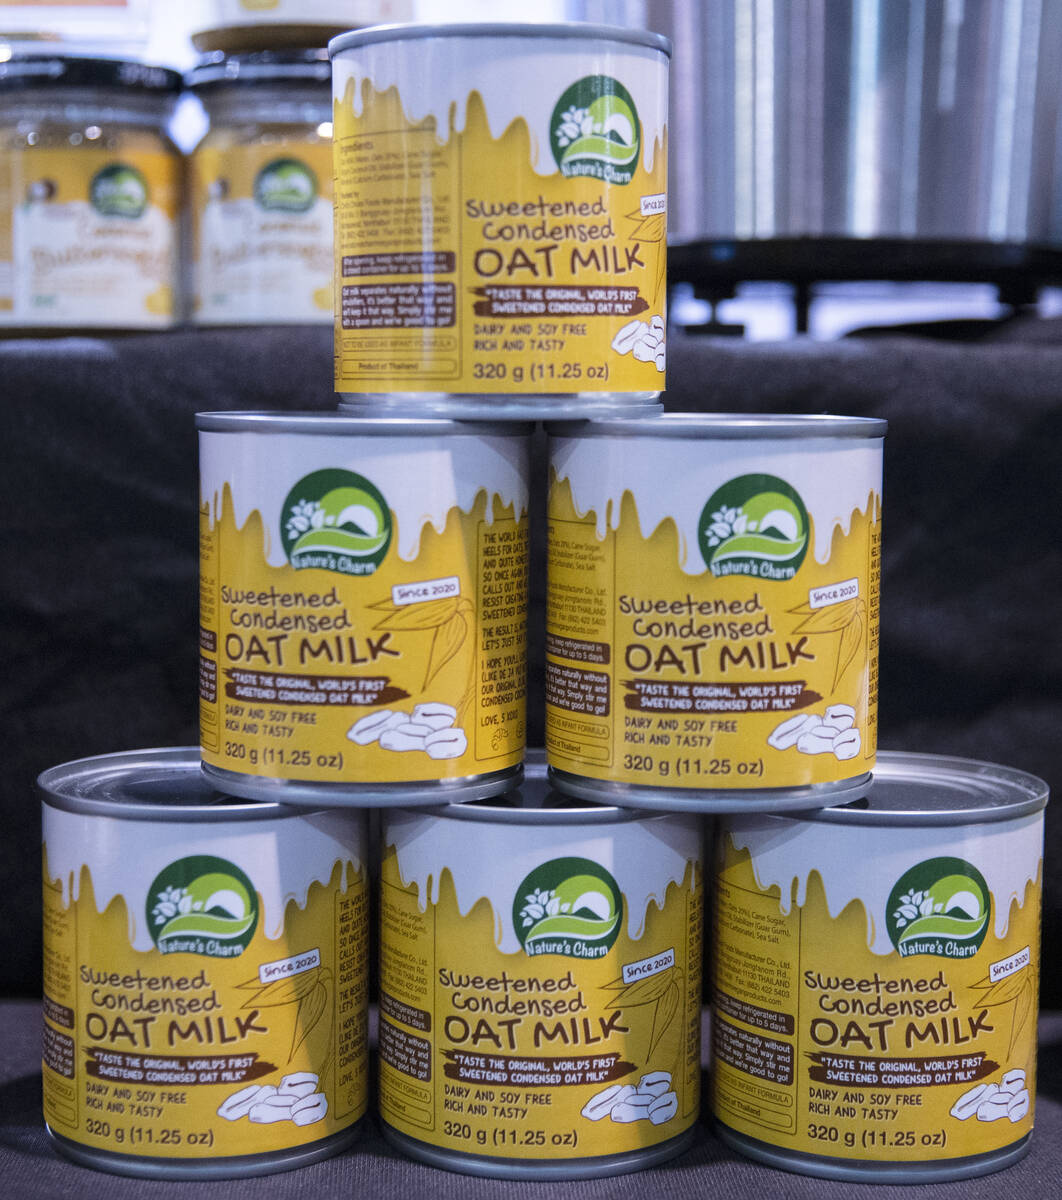 Cans of sweetened condensed oat milk by Nature's Charm are displayed during the Fancy Food Show ...